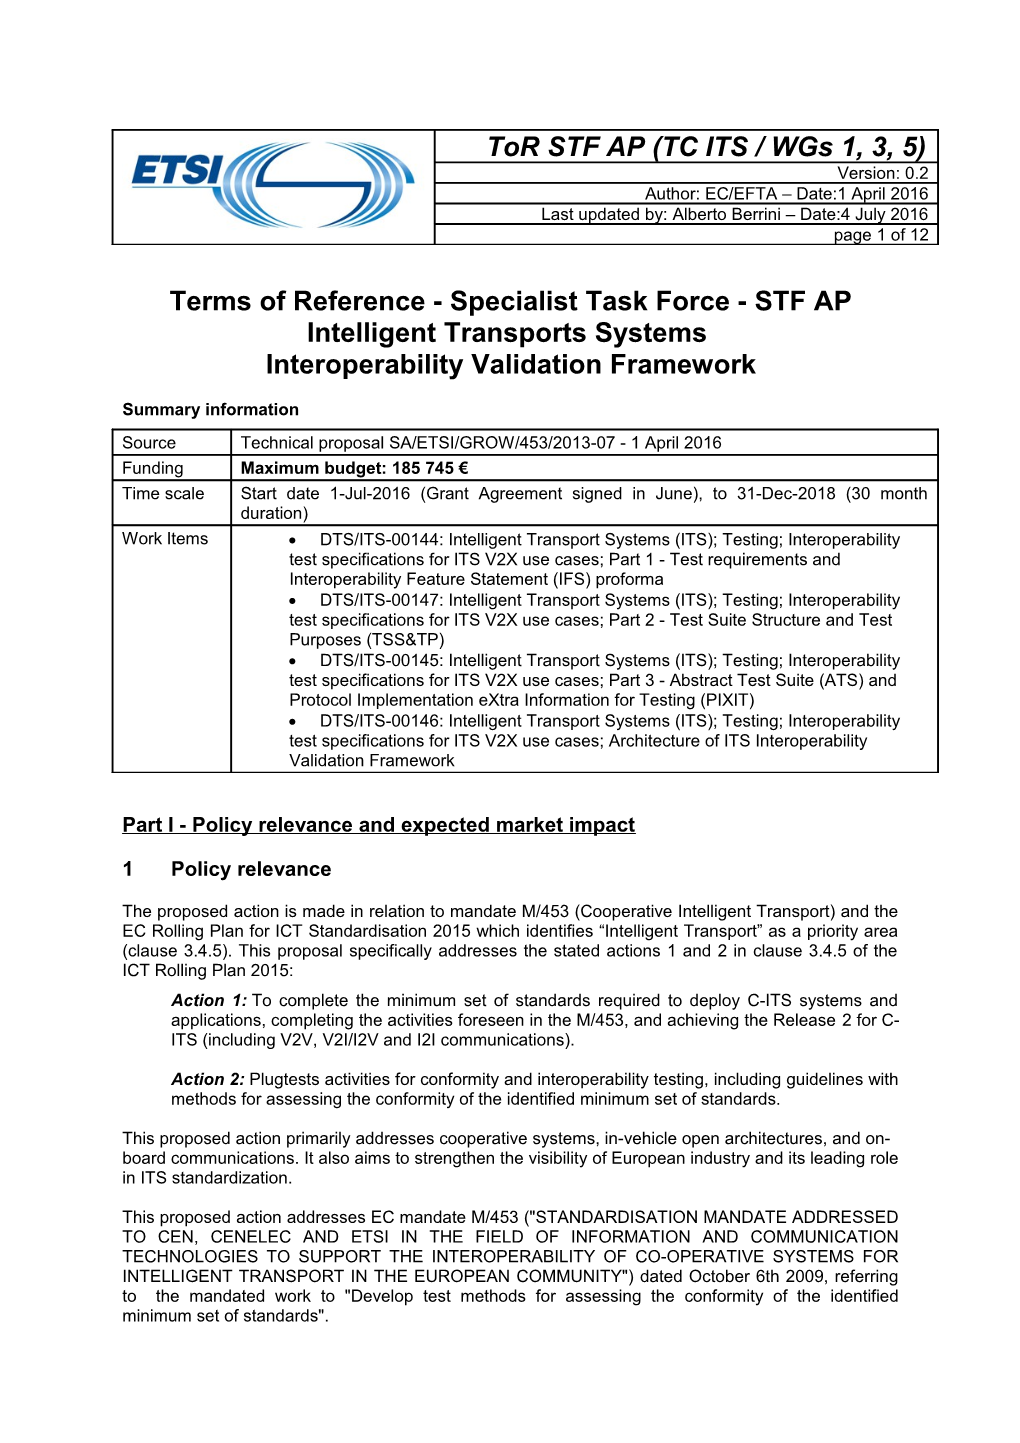 Terms of Reference - Specialist Task Force - STF AP Intelligent Transports Systems